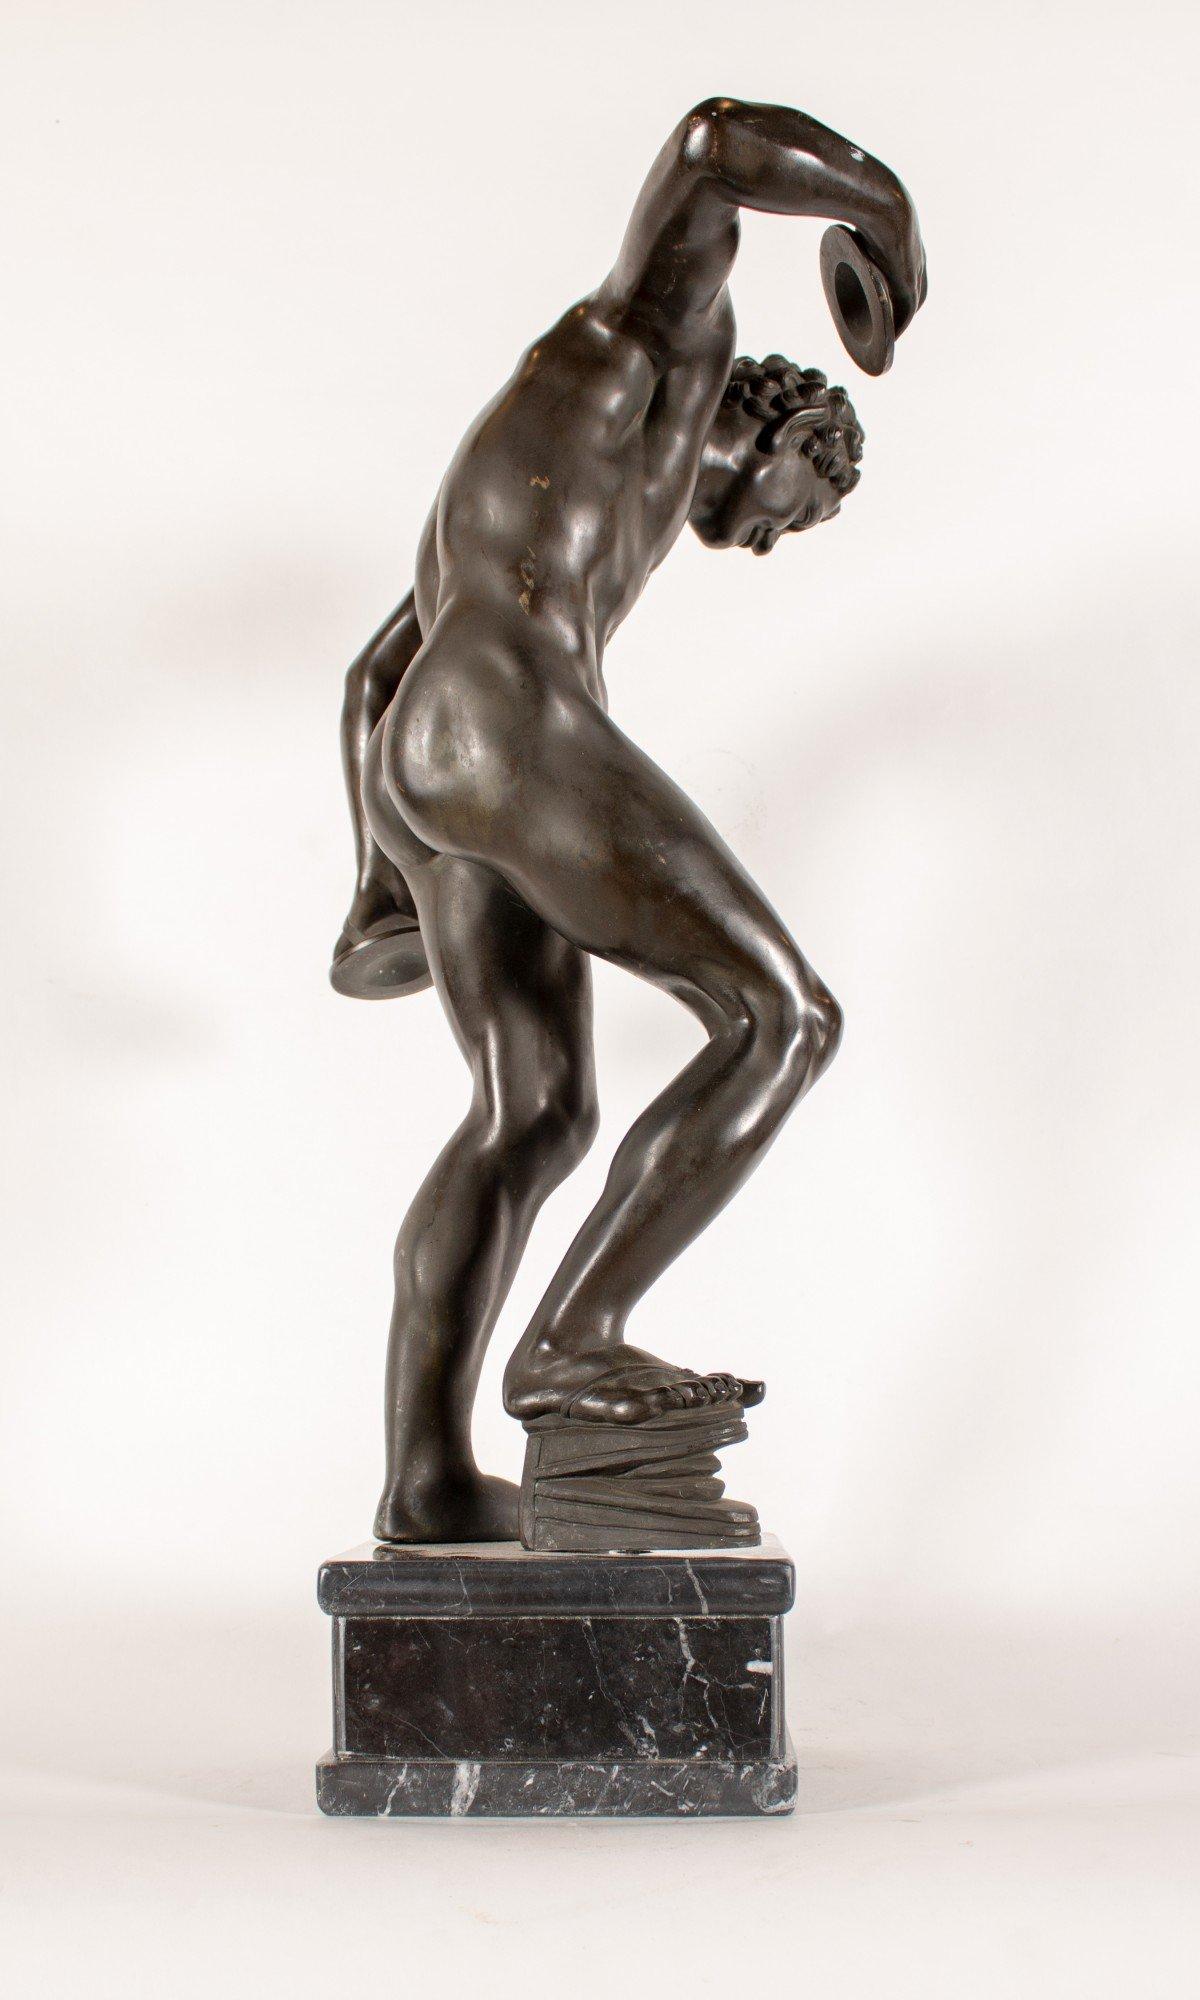 19TH CENTURY CONTINENTAL SCHOOL
Satyr with Cymbals and Kroupezion, Grand Tour after the Antique
Bronze with marble base
26 in. h. x 15 in. w. x 10 in. d.

This dancing faun is now more precisely identified as a satyr. Satyrs are roguish figures from